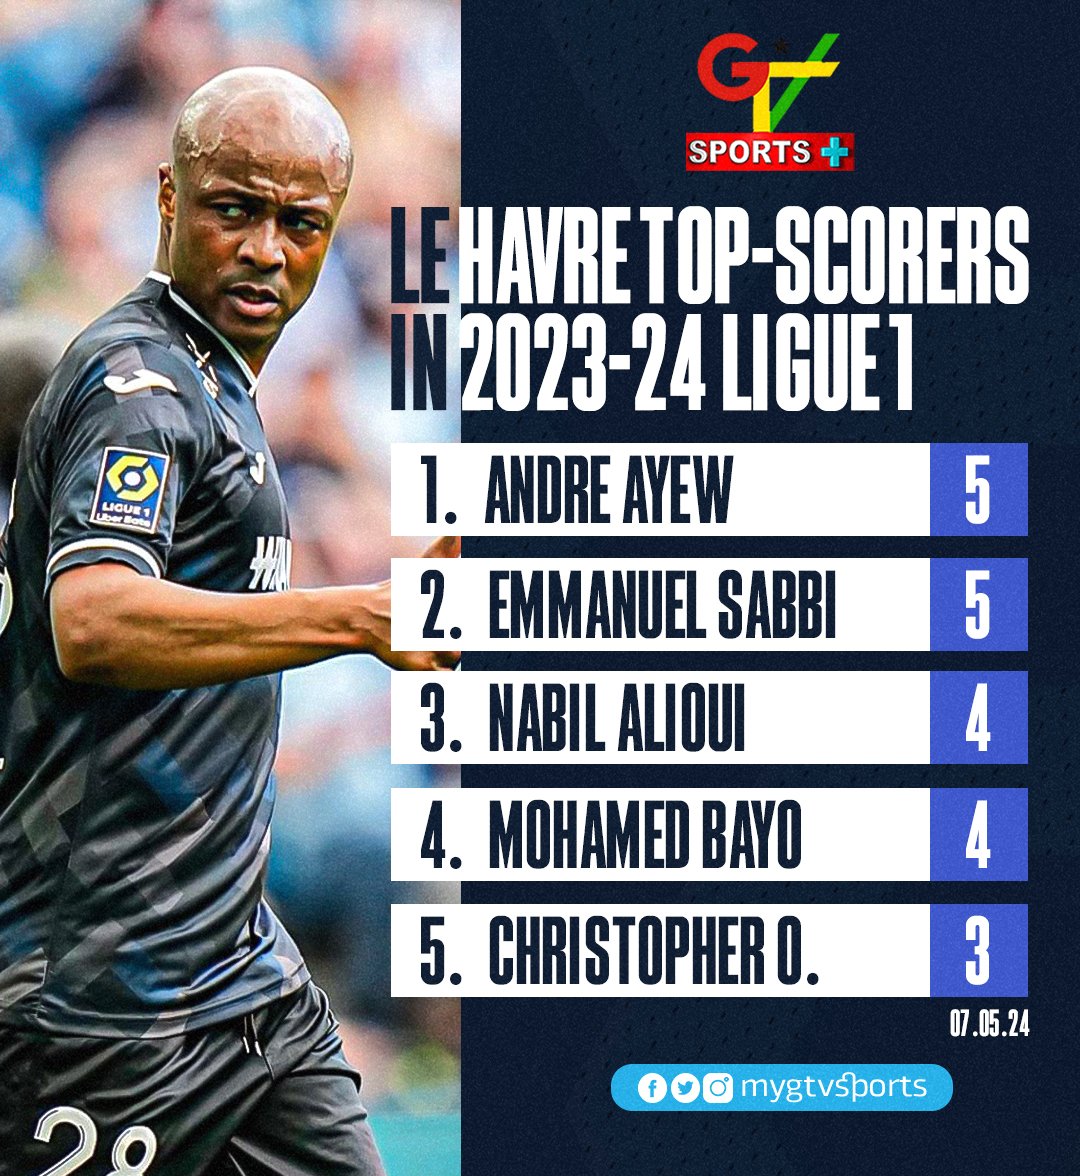 Black Stars Captain Andre Ayew is balling at Le Havre this season.

#GTVSports